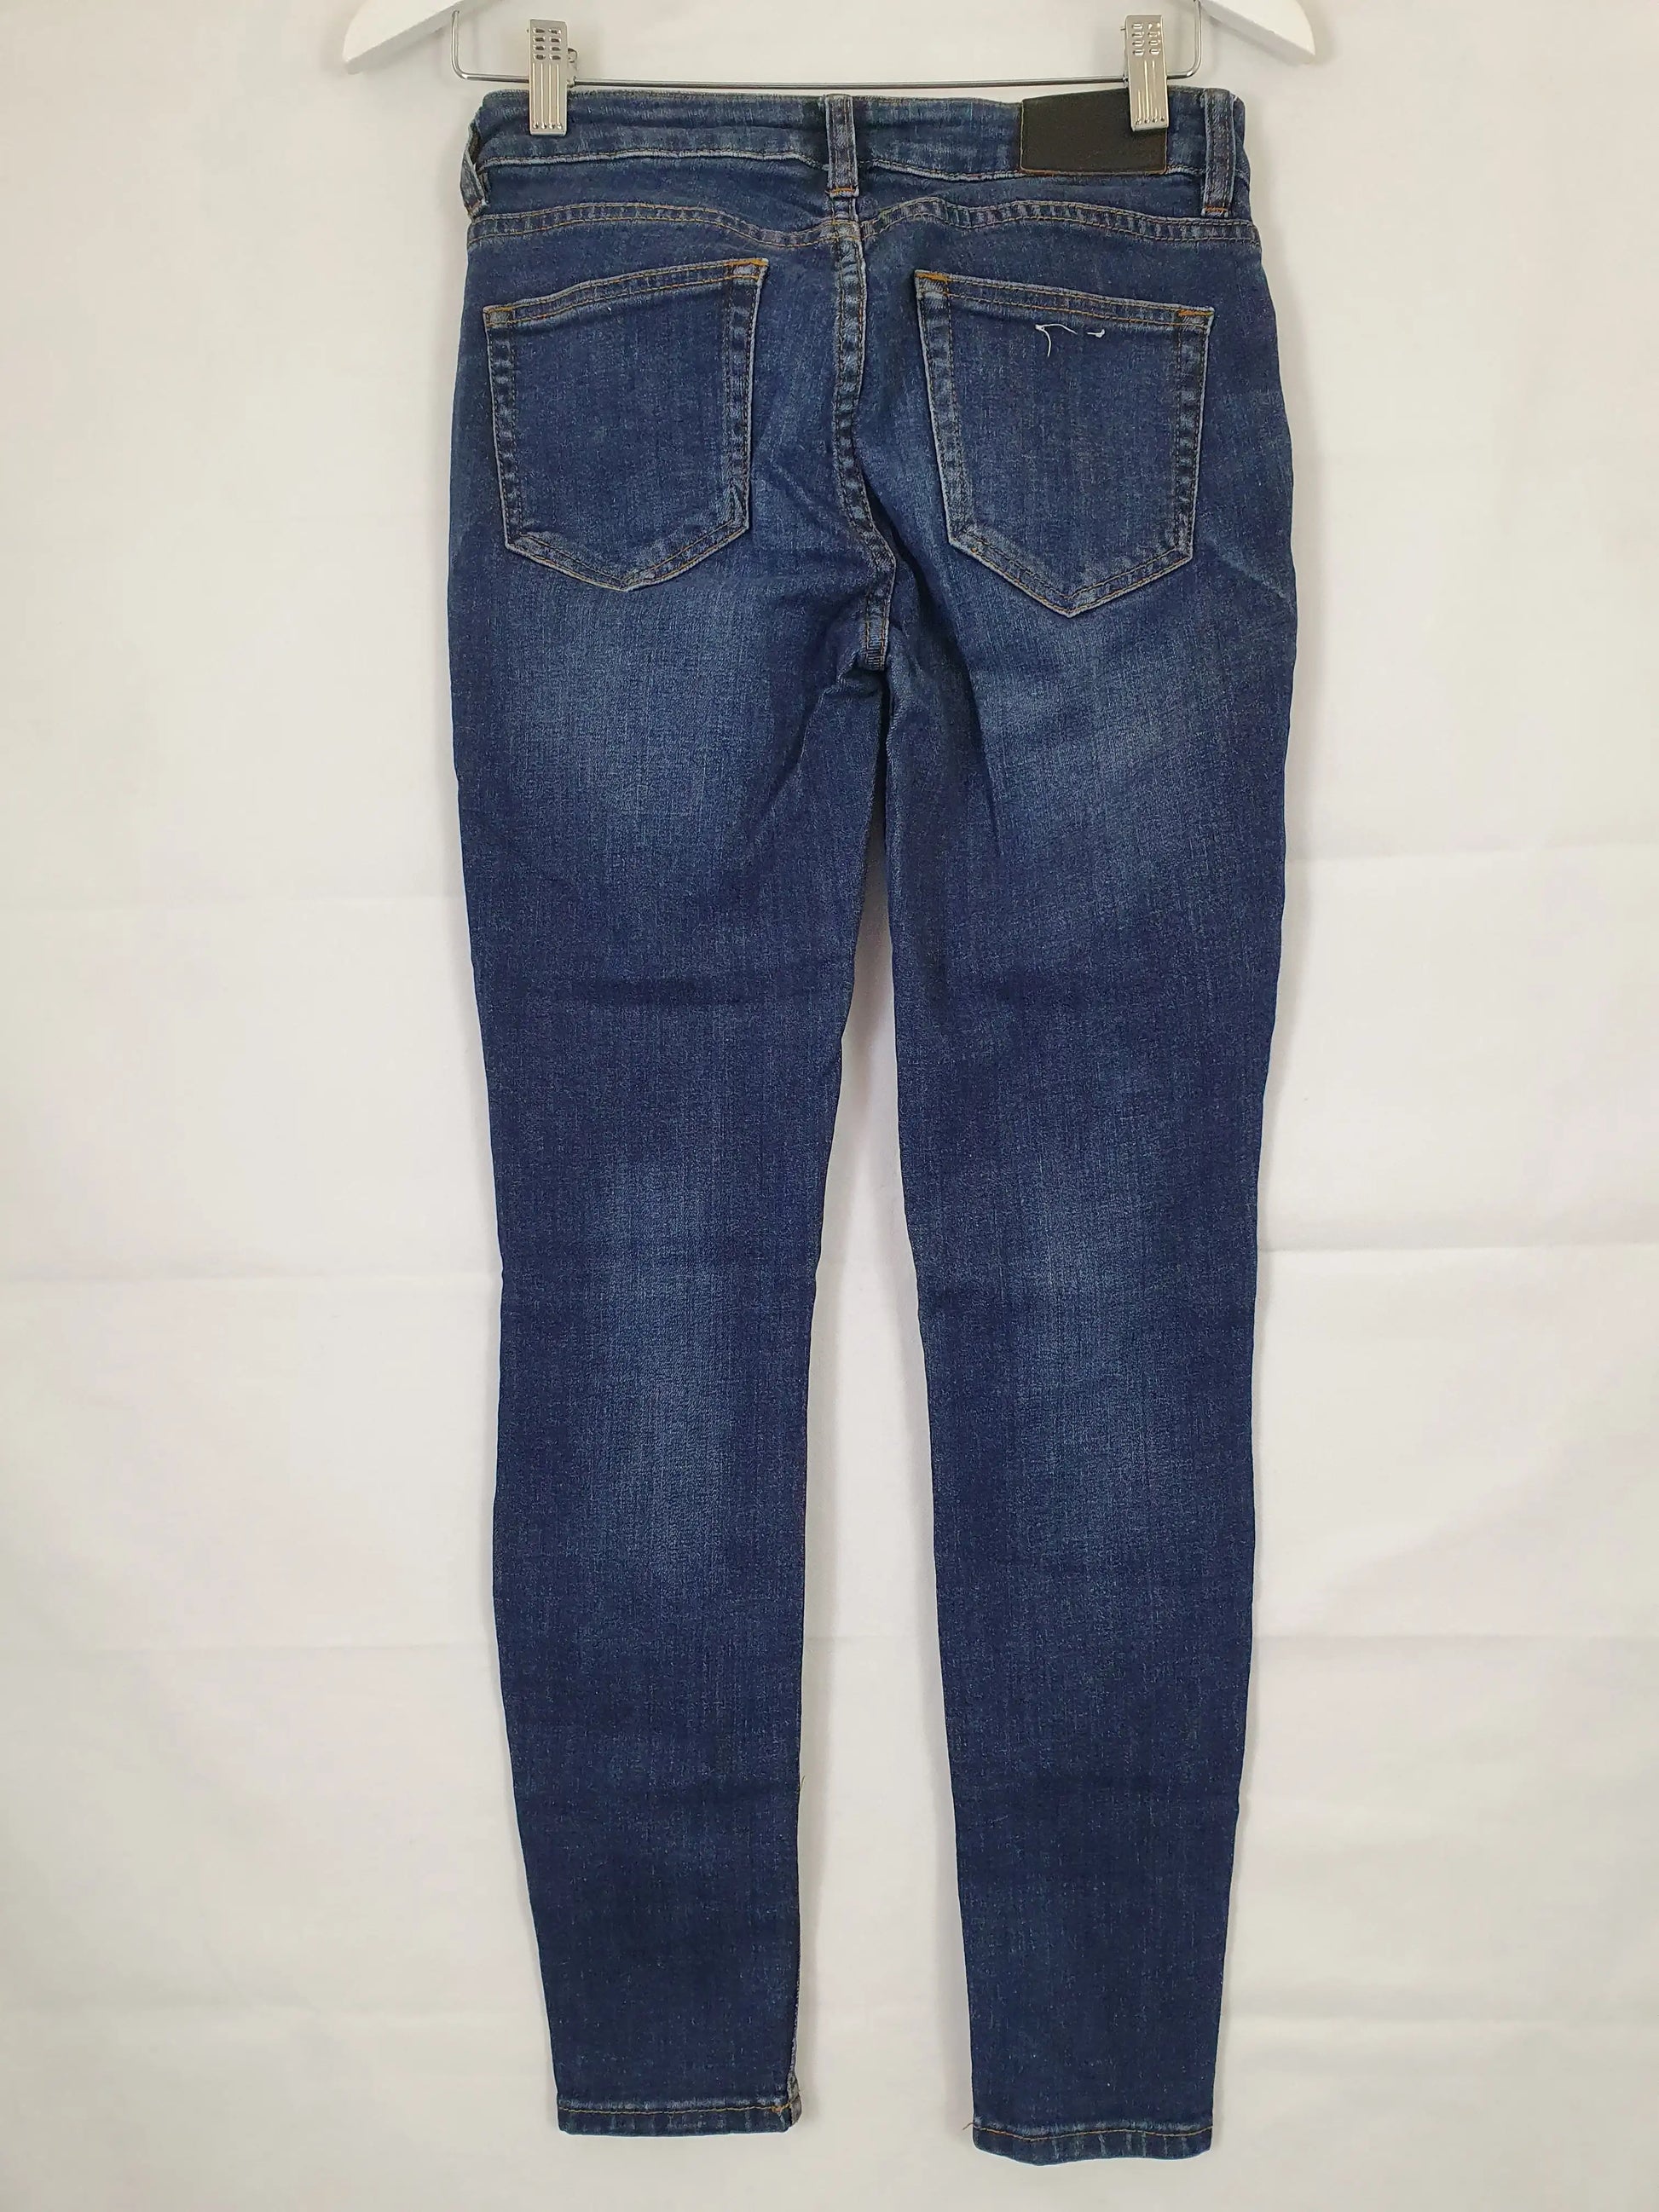 Jag The Joey Jeans Size 8 by SwapUp-Second Hand Shop-Thrift Store-Op Shop 